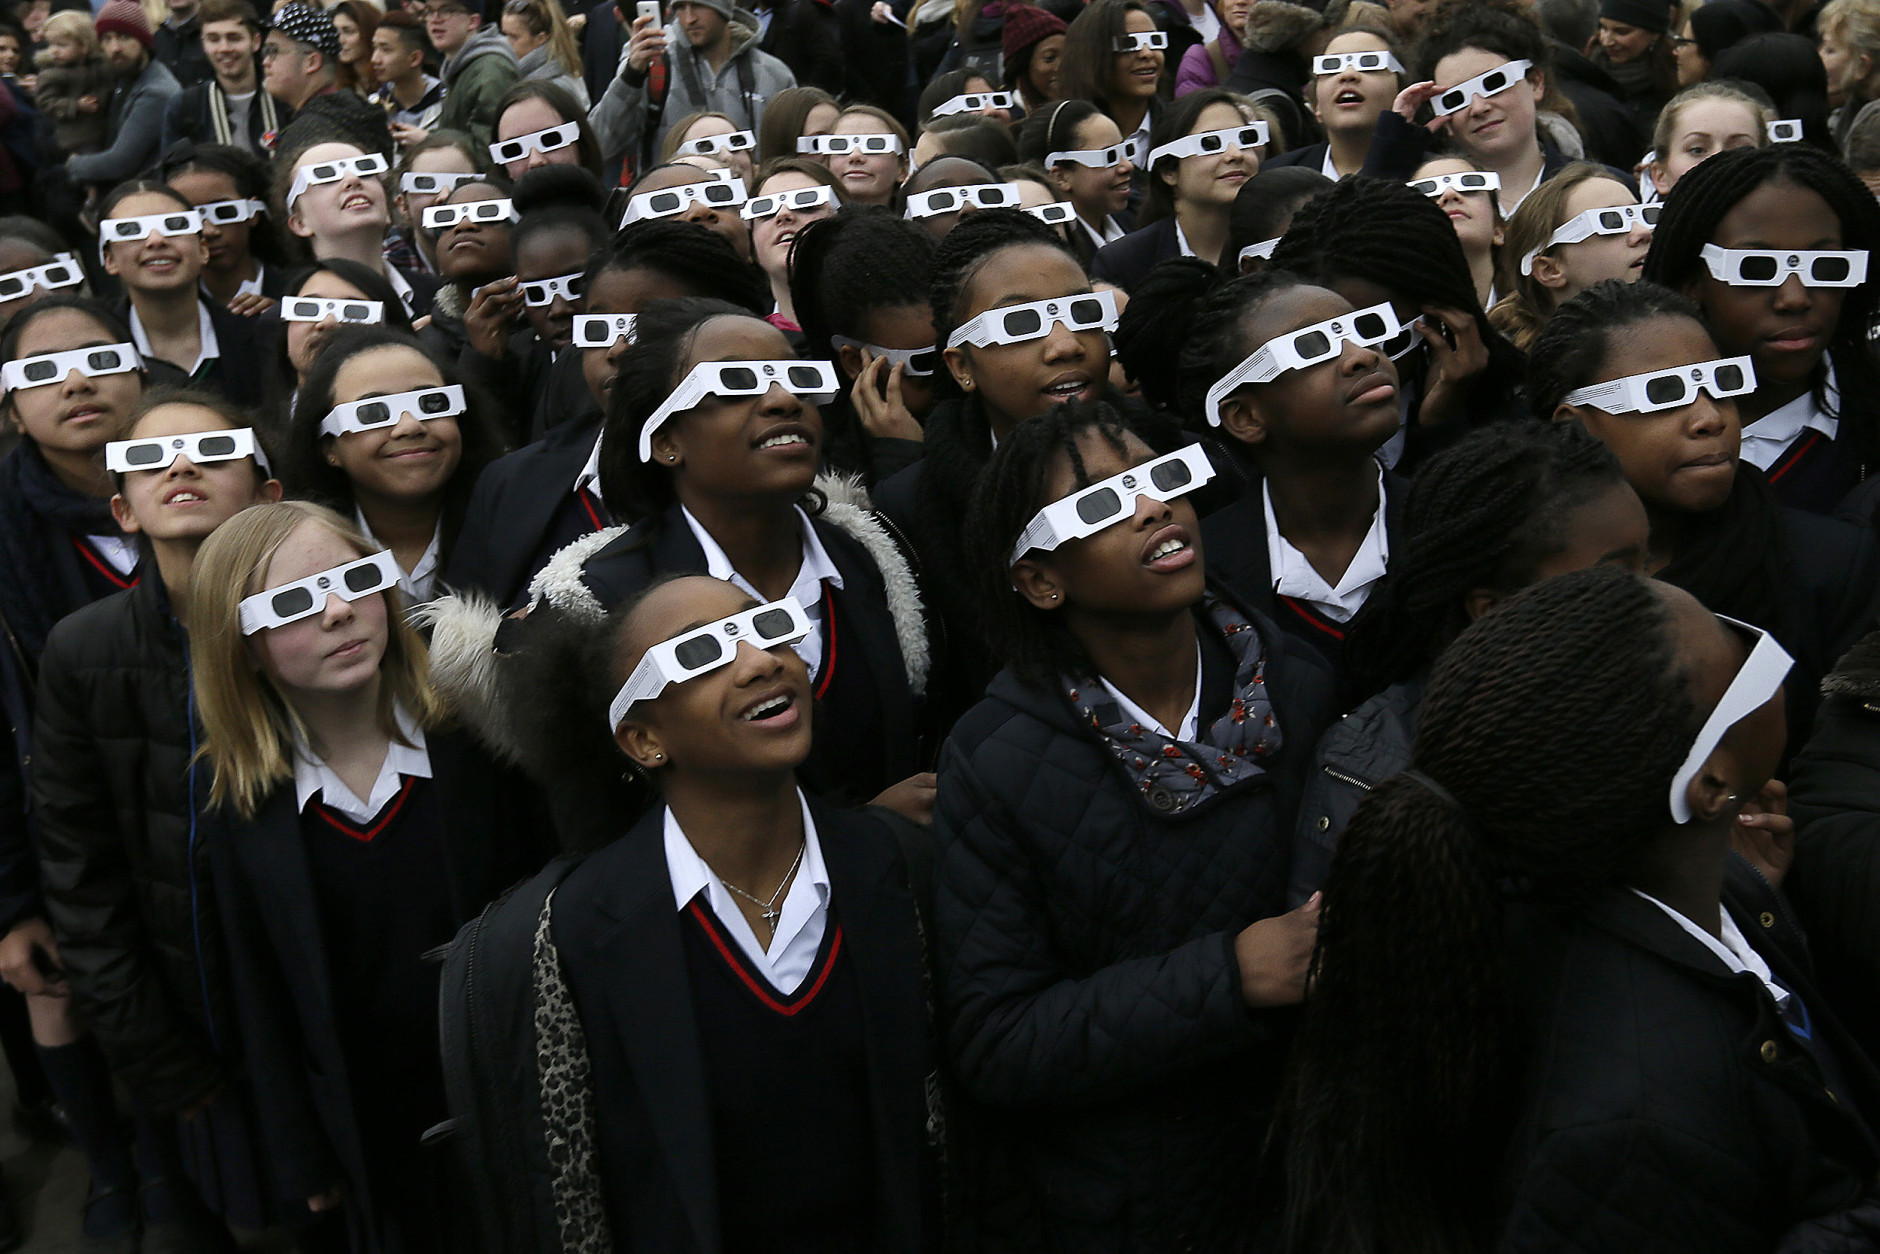 Schoolchildren pose for photographers at the Royal Observatory in Greenwich Park, as people gather to try to see the solar eclipse in London, Friday, March 20, 2015. In the capital, thick cloud cover obscured a view of the sun. (AP Photo/Tim Ireland)